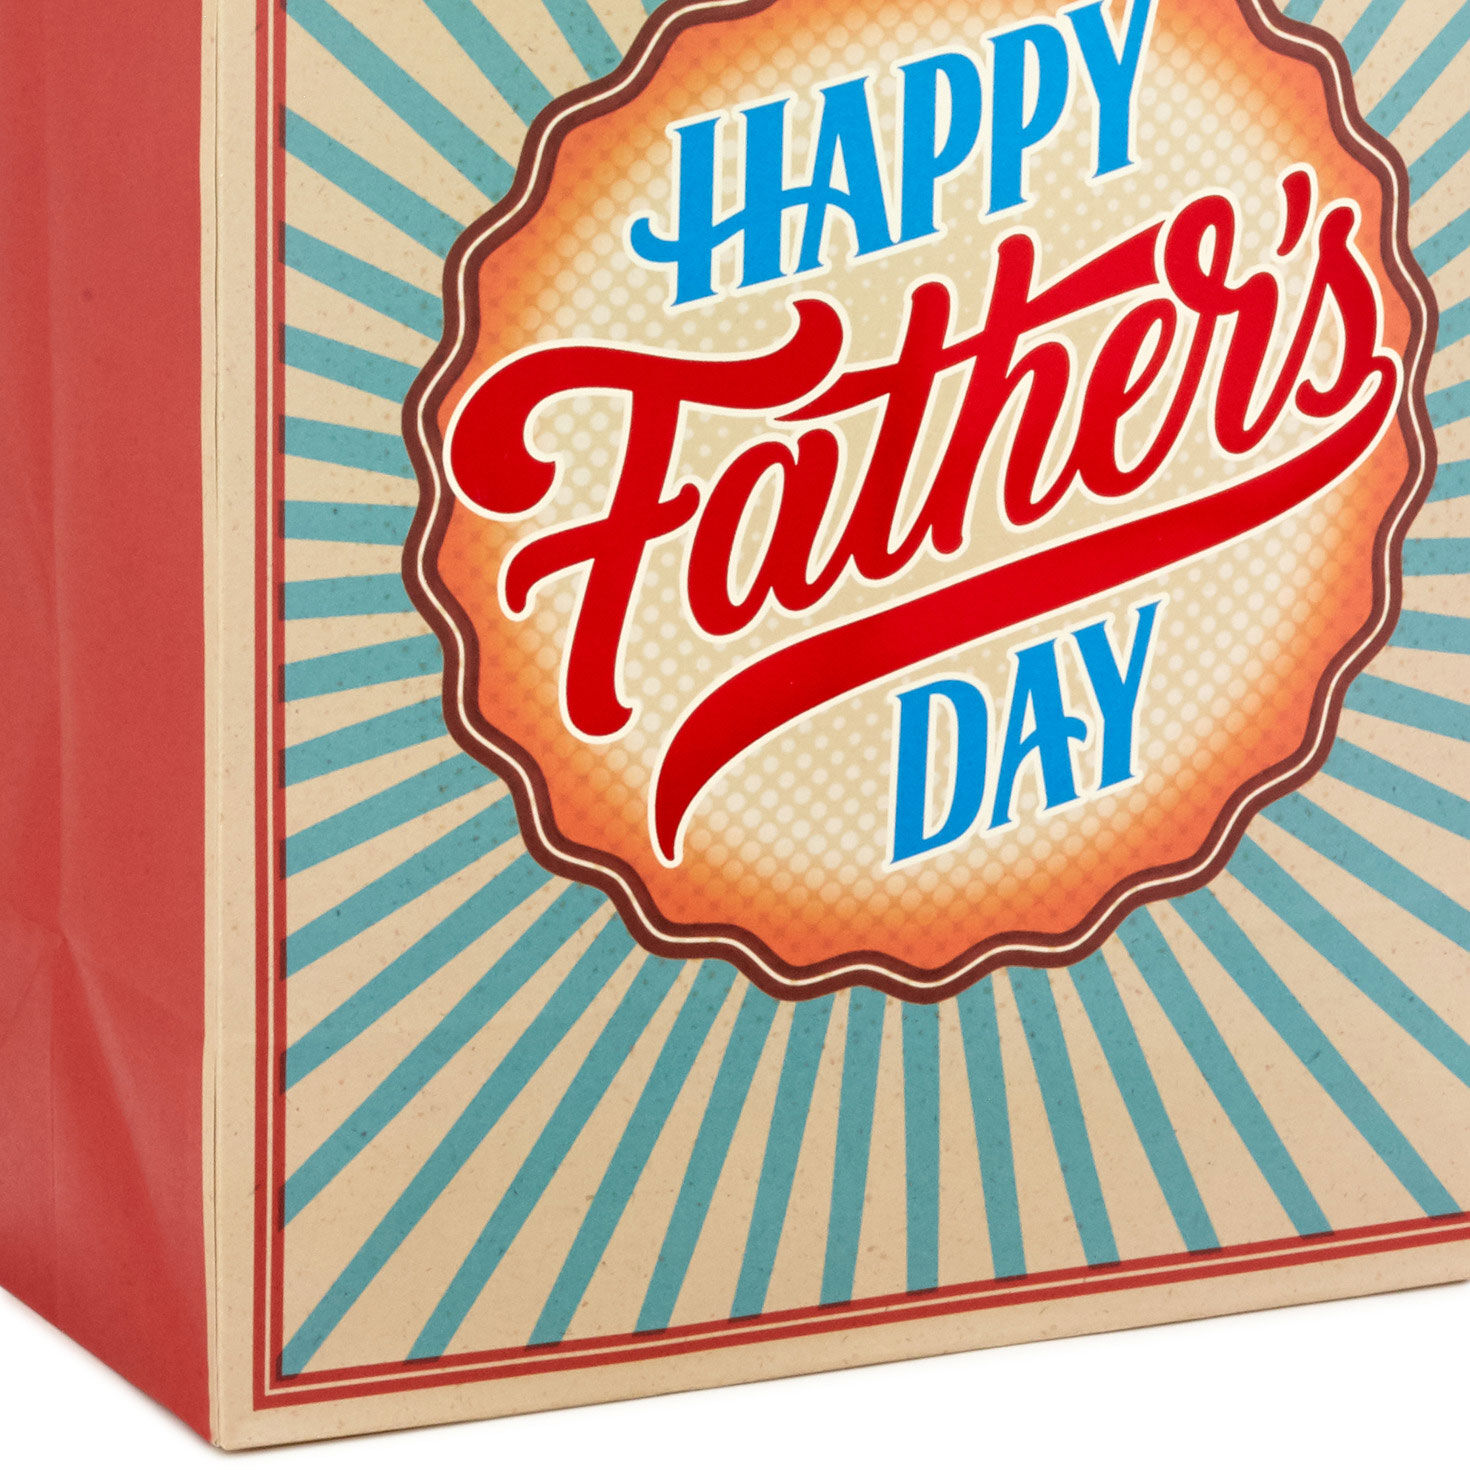 13" Happy Father's Day Large Gift Bag With Greeting Card and Tissue Paper for only USD 9.99 | Hallmark